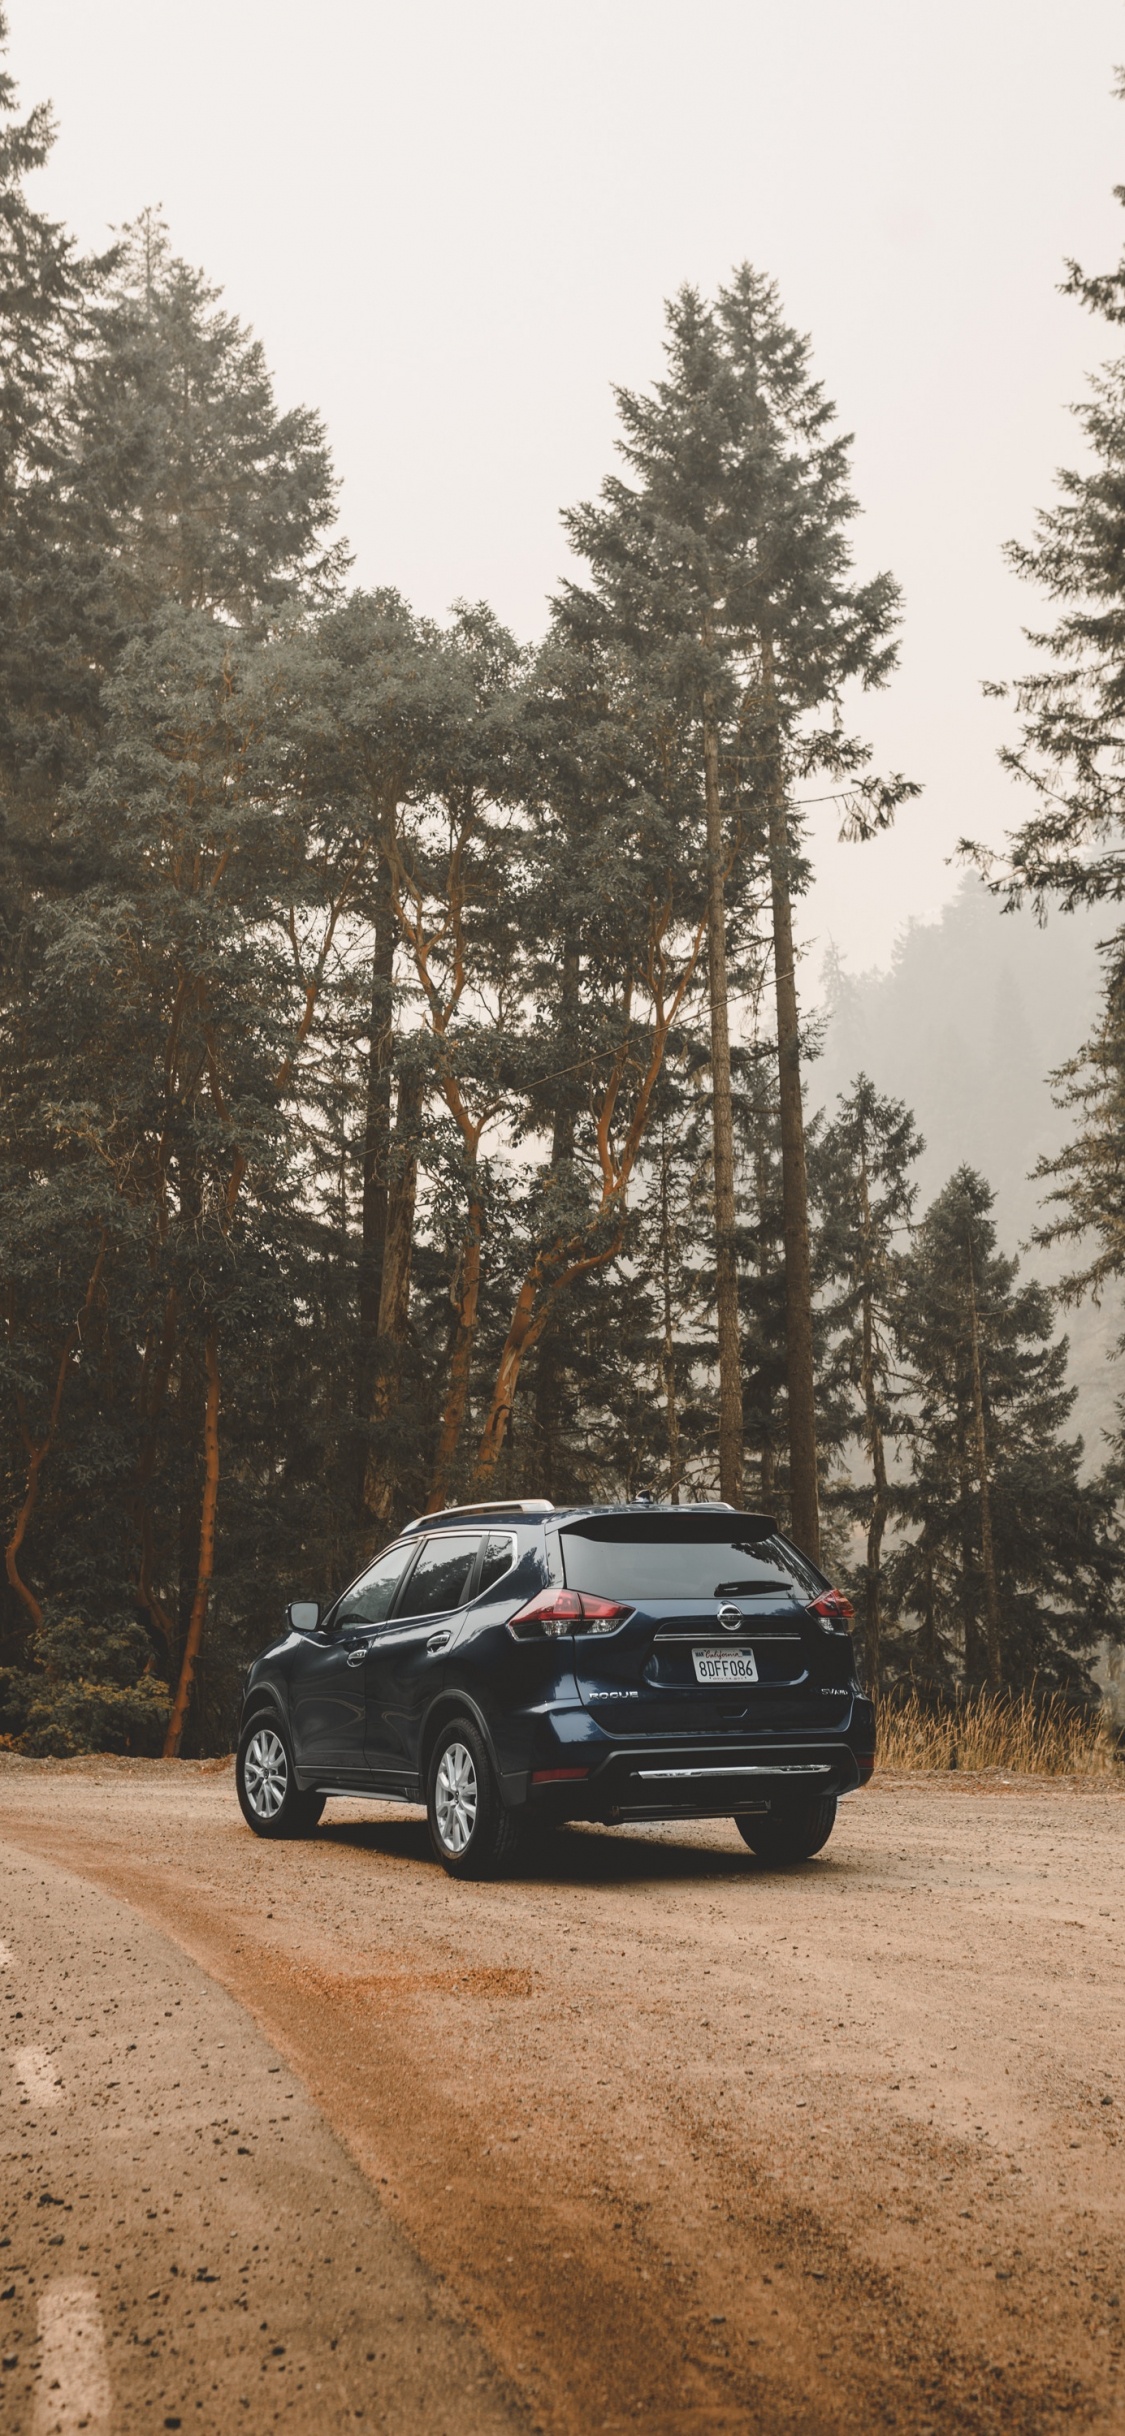 Black Car on Dirt Road Near Trees During Daytime. Wallpaper in 1125x2436 Resolution